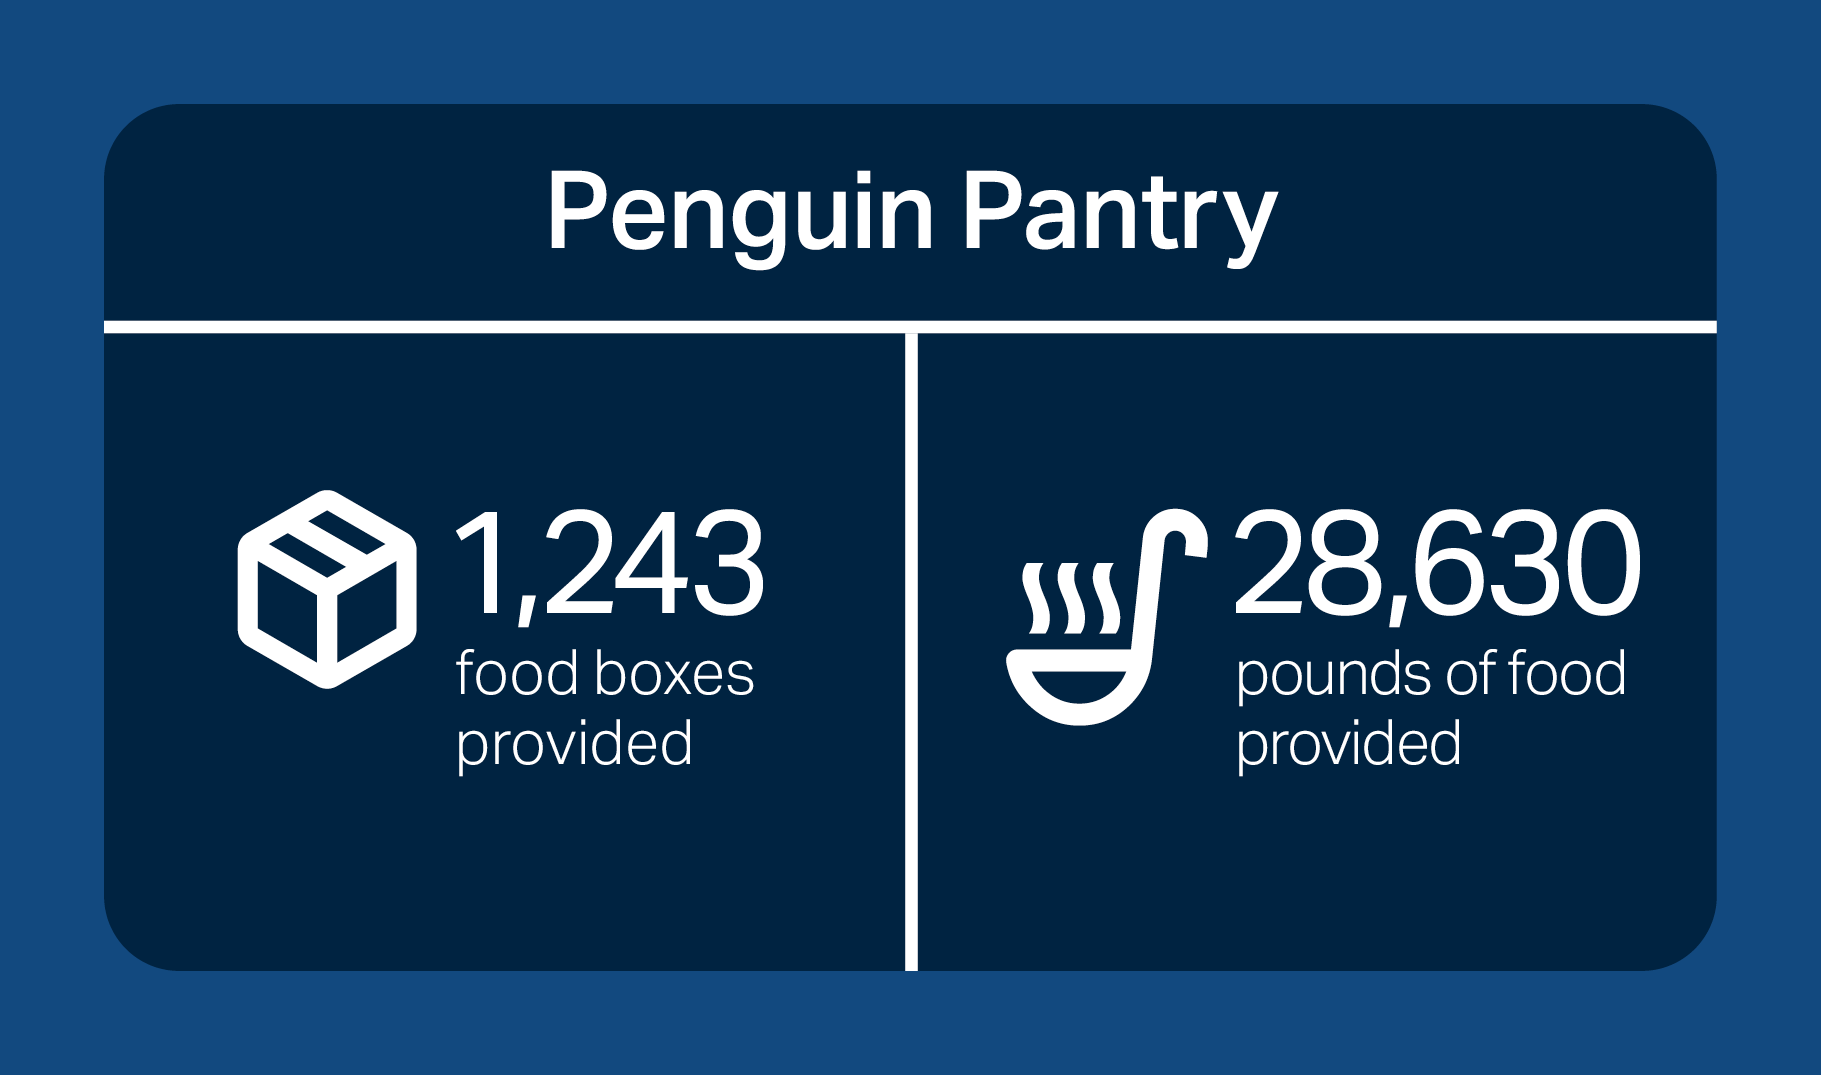 Penguin pantry. In 2023 Penguin pantry dispersed 1243 food boxes which was roughly 28,630 pounds of food